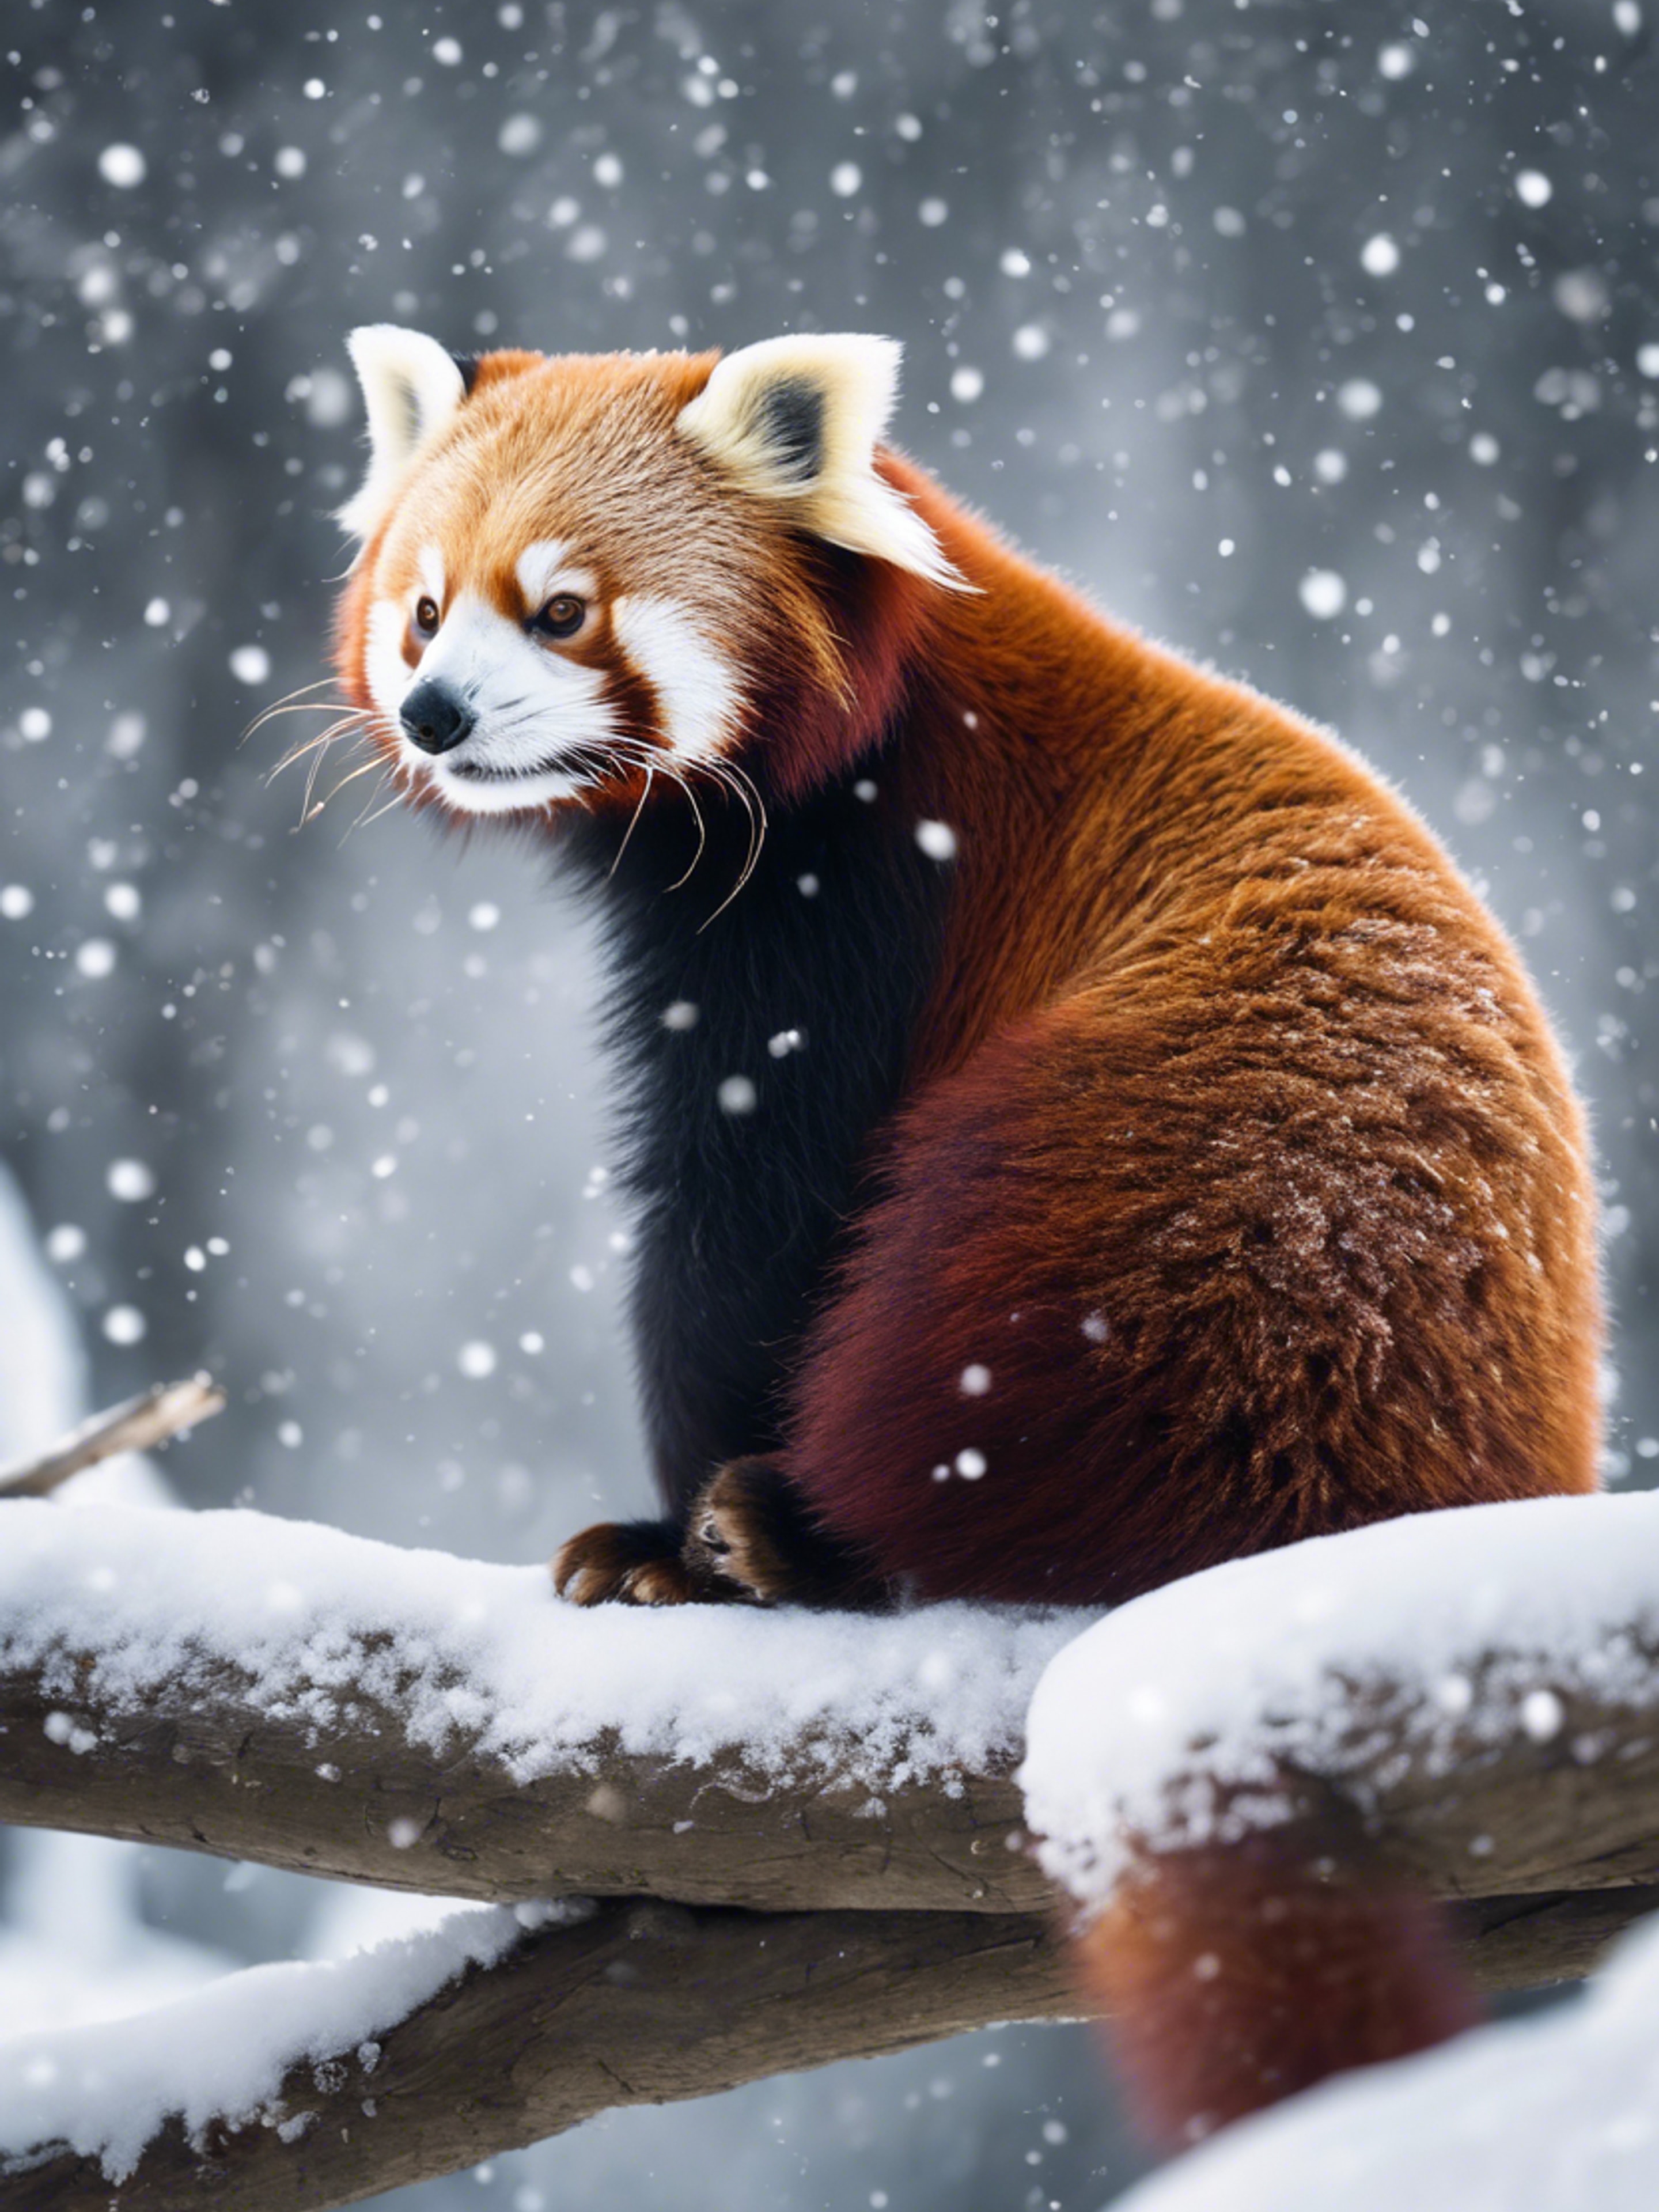 A red panda in winter, its fur looking extra striking against the snow. Tapet[00977545189243e2b3f0]